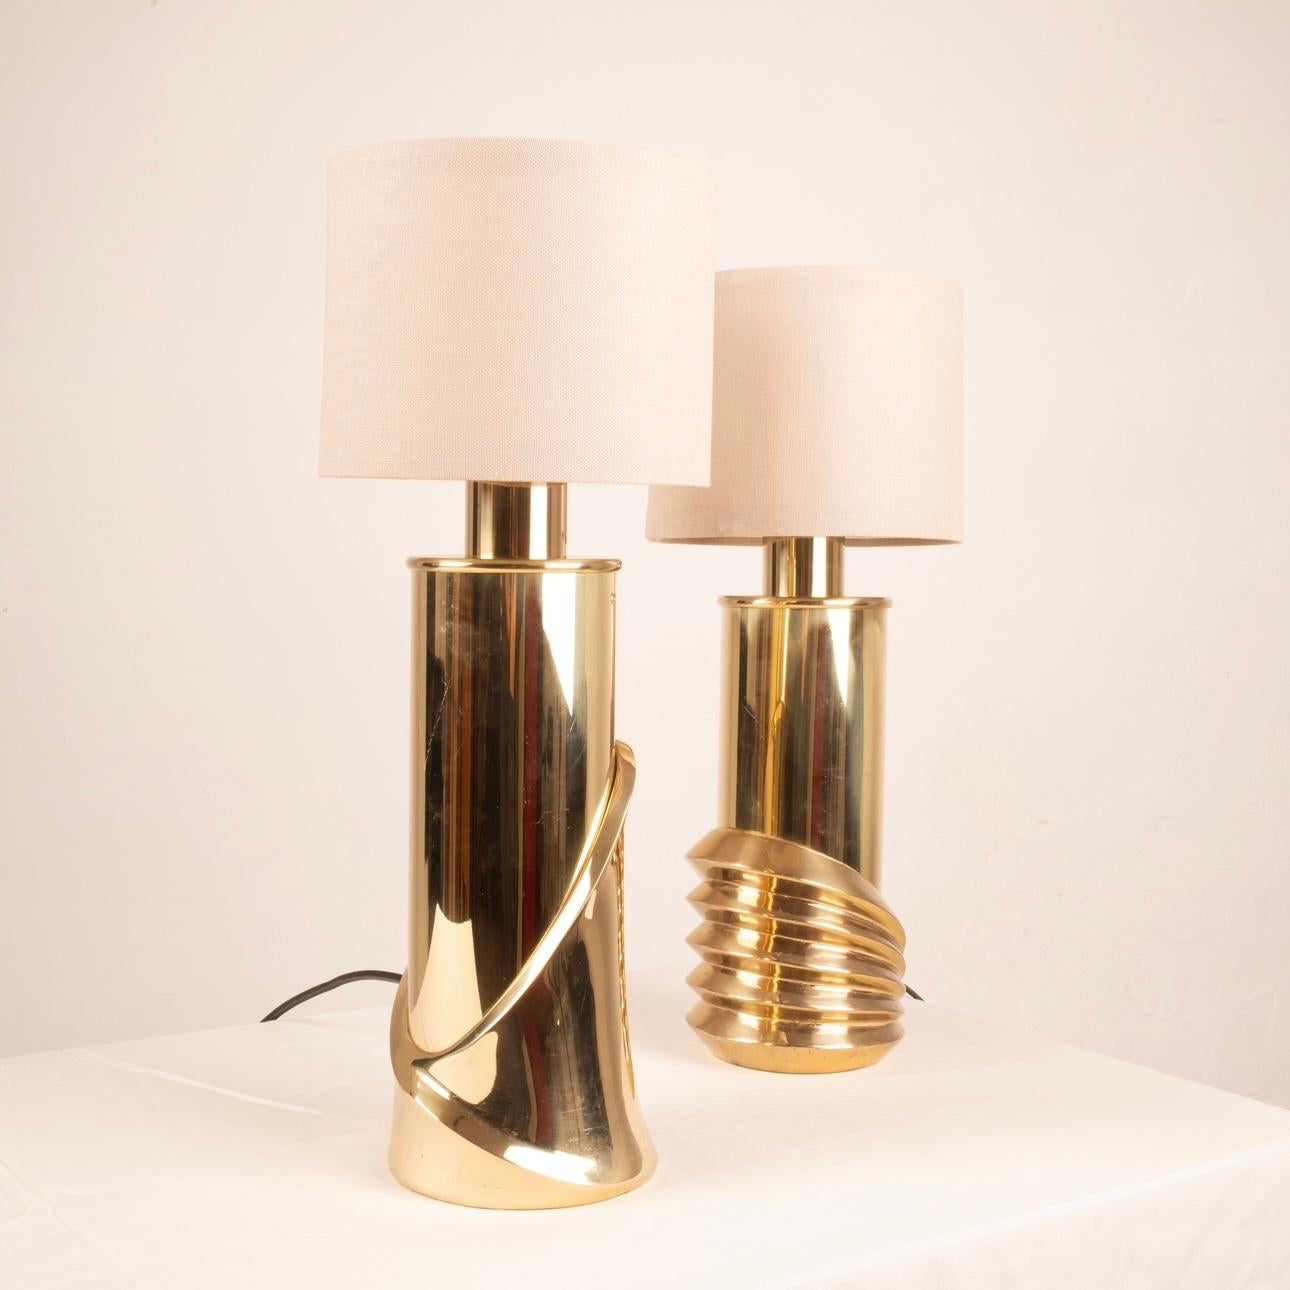 Pair of Brass Lamps by Luciano Frigerio for Frigerio of Desio For Sale 4